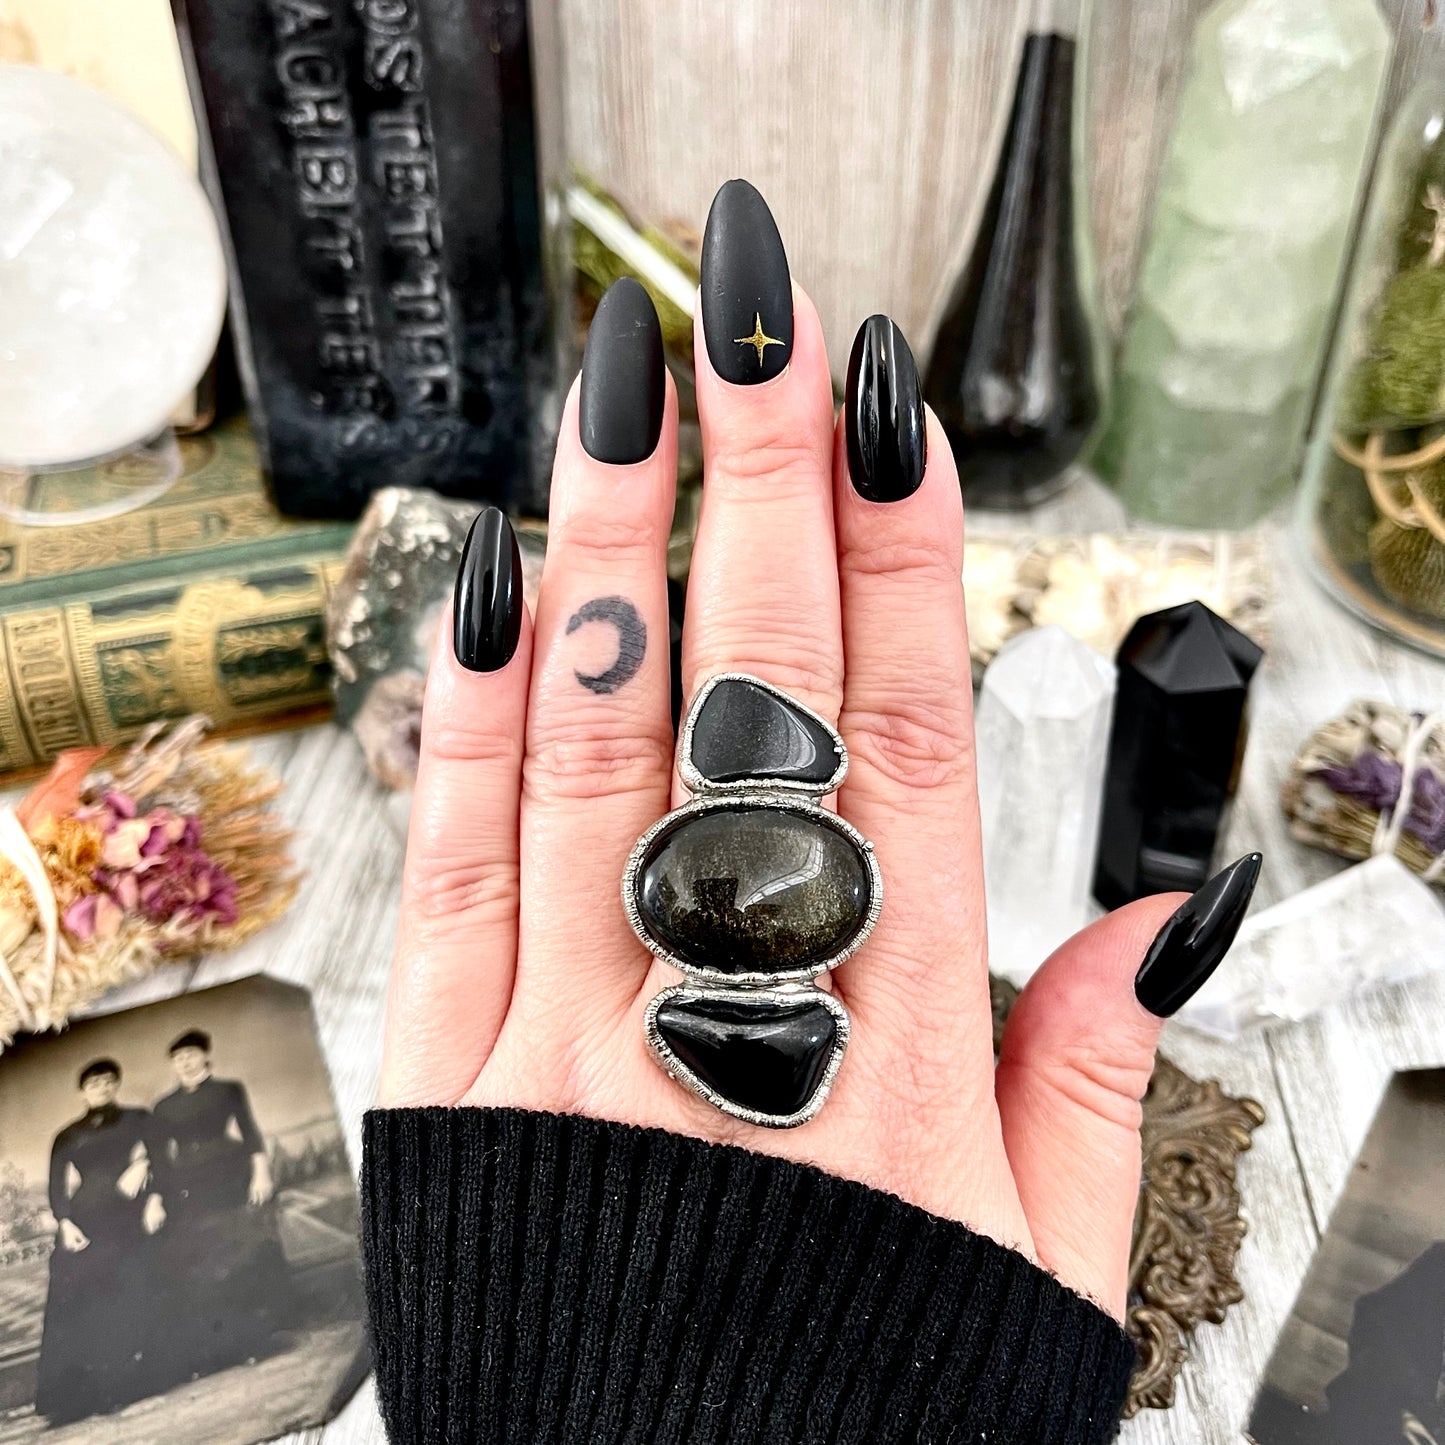 Size 10 Crystal Ring - Three Stone Ring Black Onyx & Silver Sheen Obsidian Silver Ring / Foxlark Collection - One of a Kind